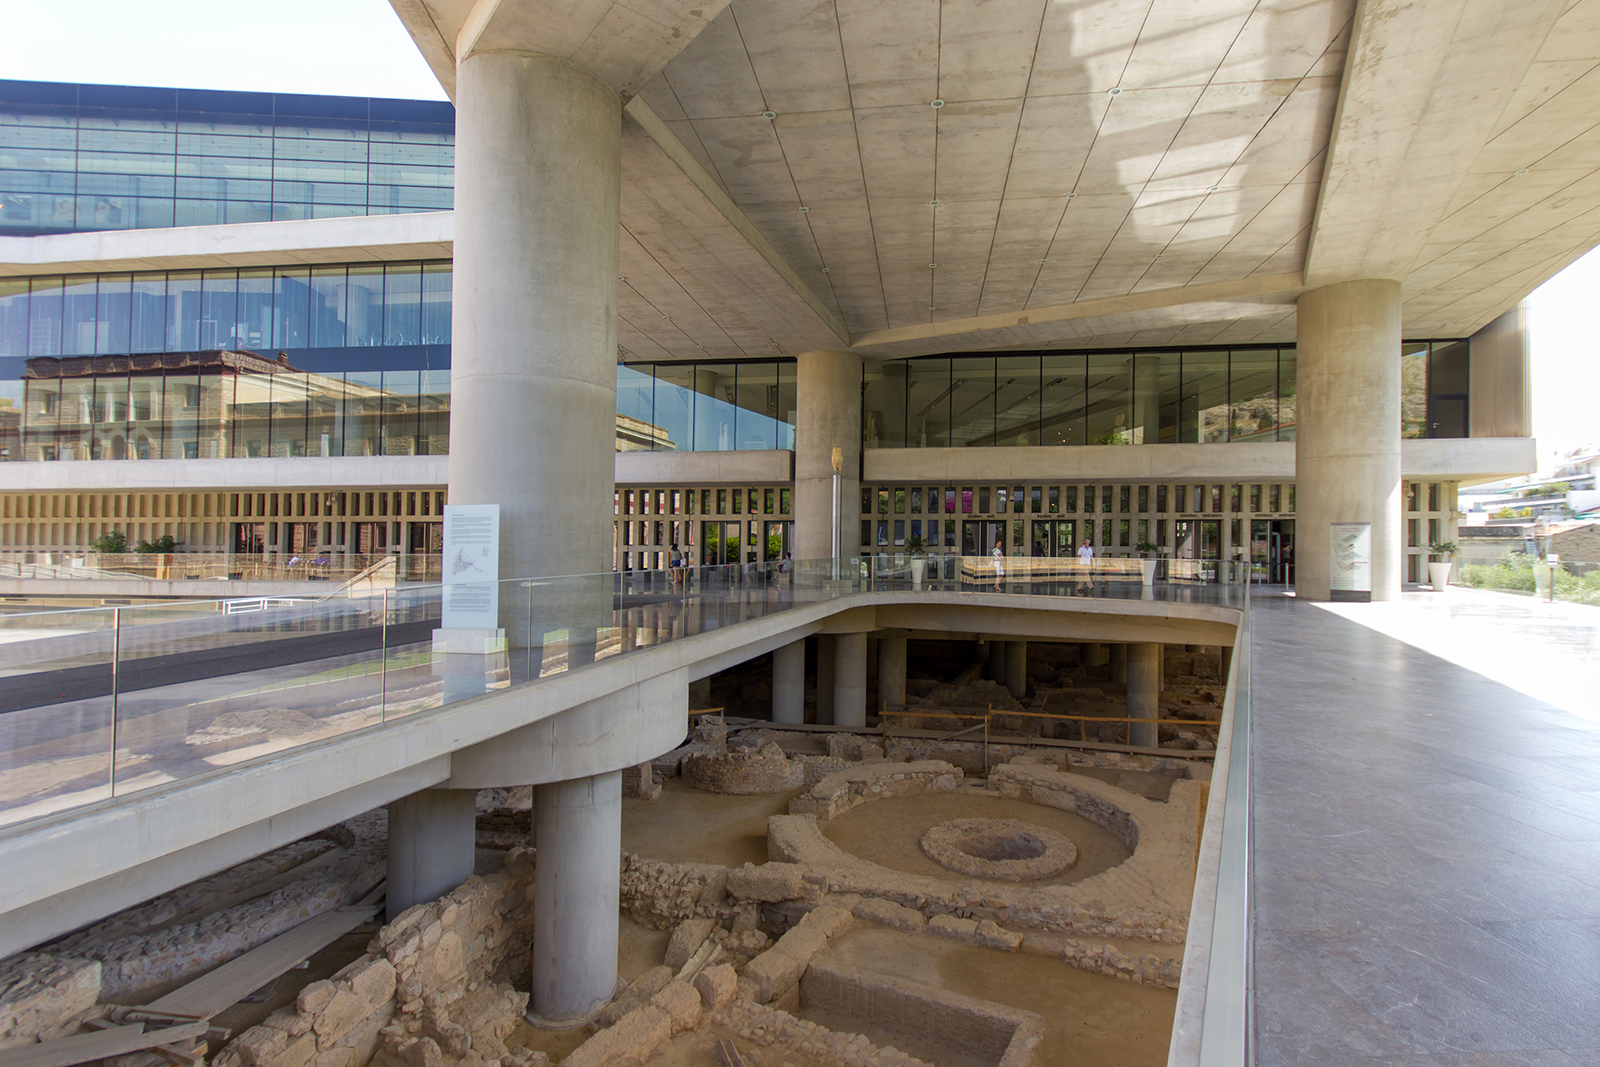 Acropolis museum in Athens